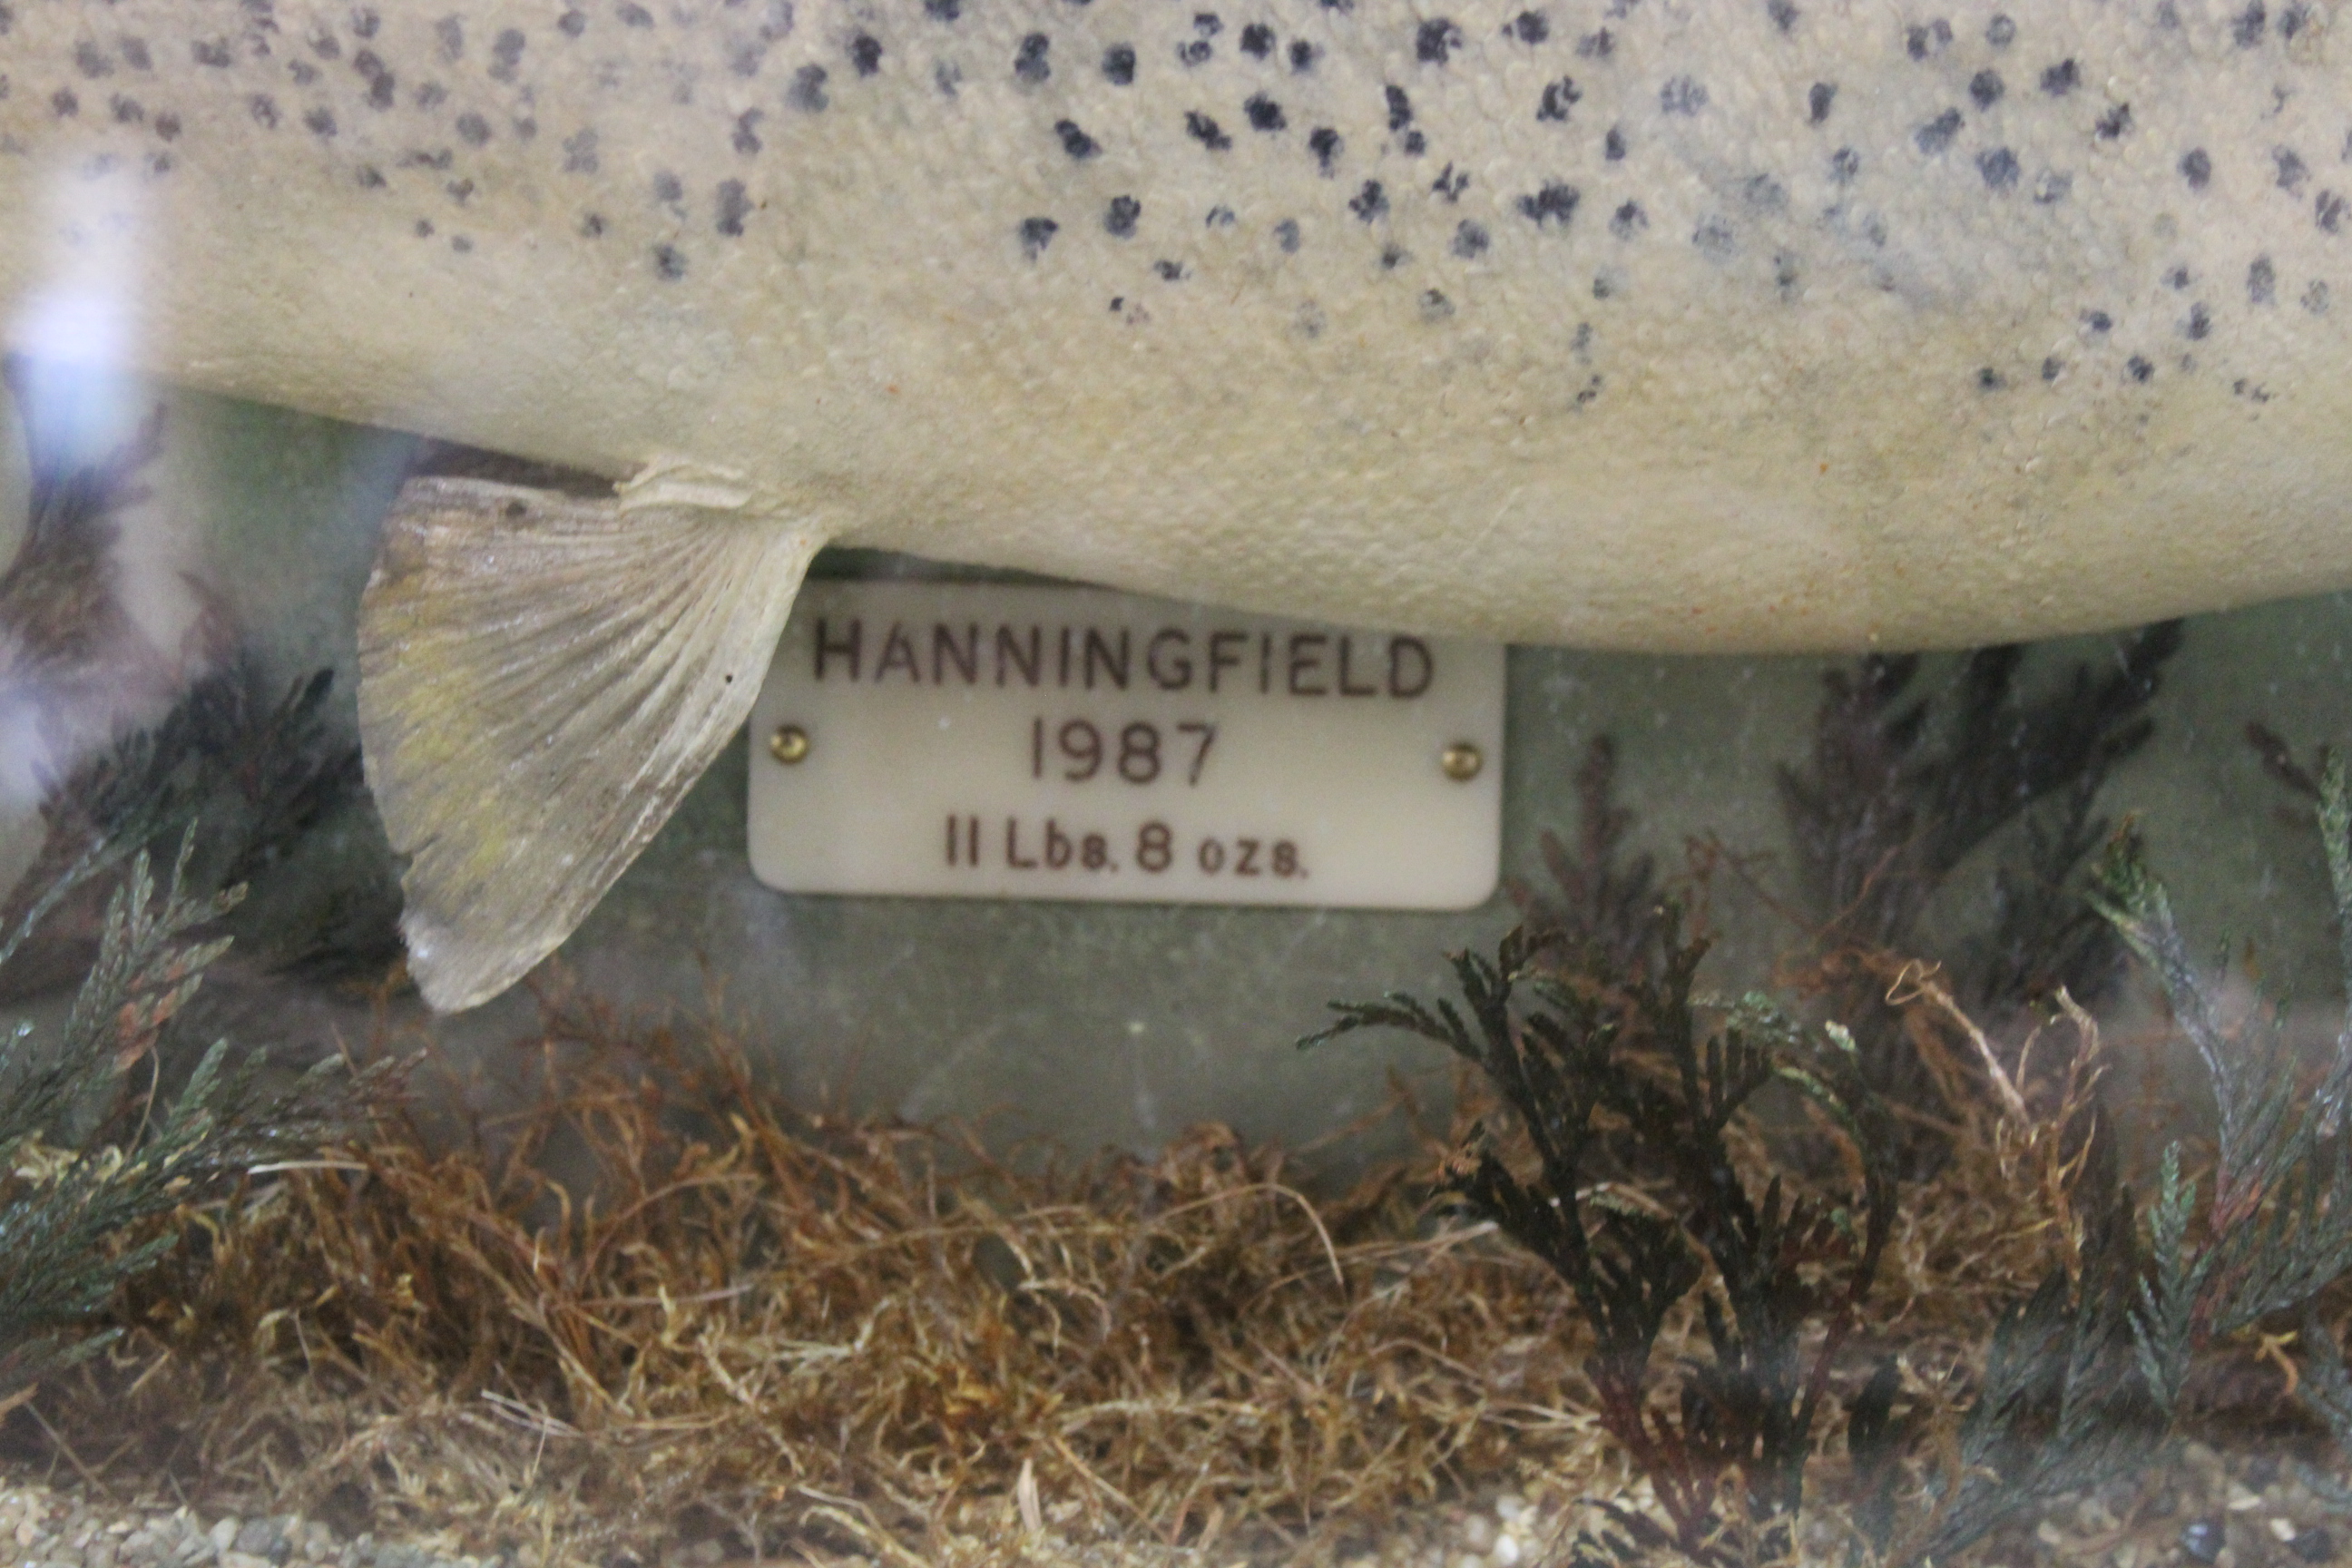 A cased taxidermy rainbow trout caught at 'Hanningfield' (reservoir, - Image 2 of 3